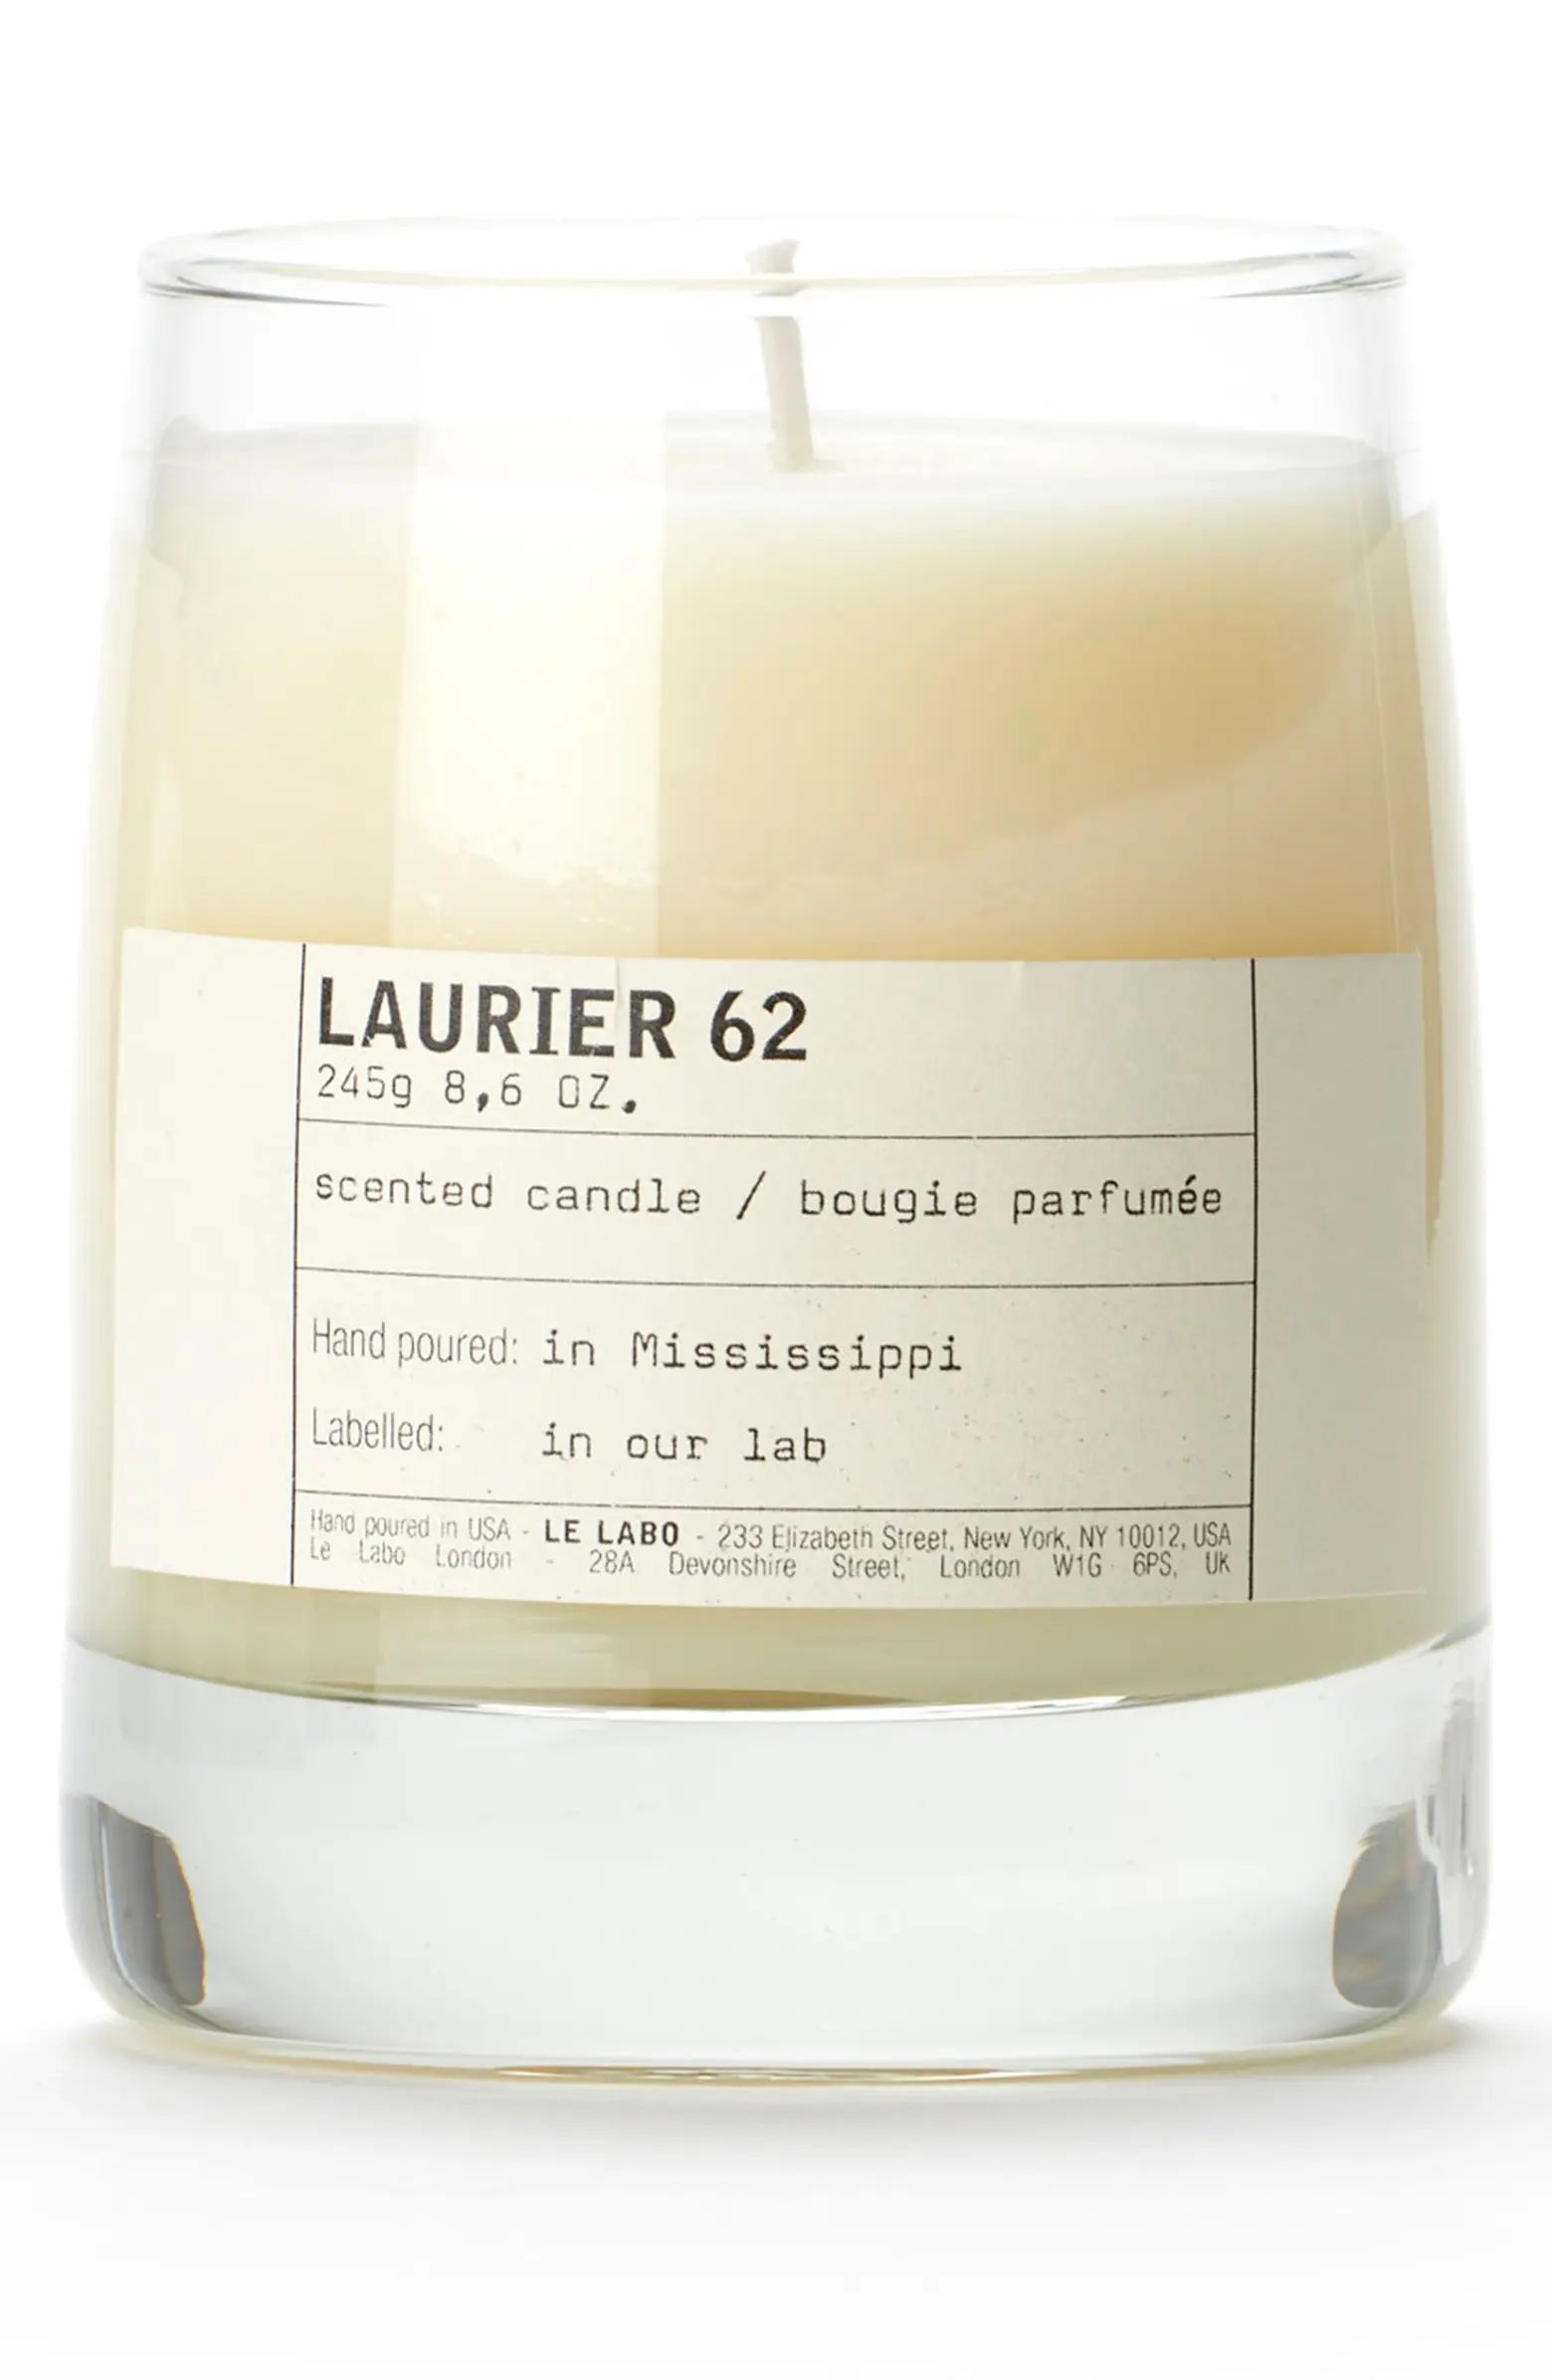 Le Labo Laurier 62 Classic Candle | Nordstrom | Nordstrom